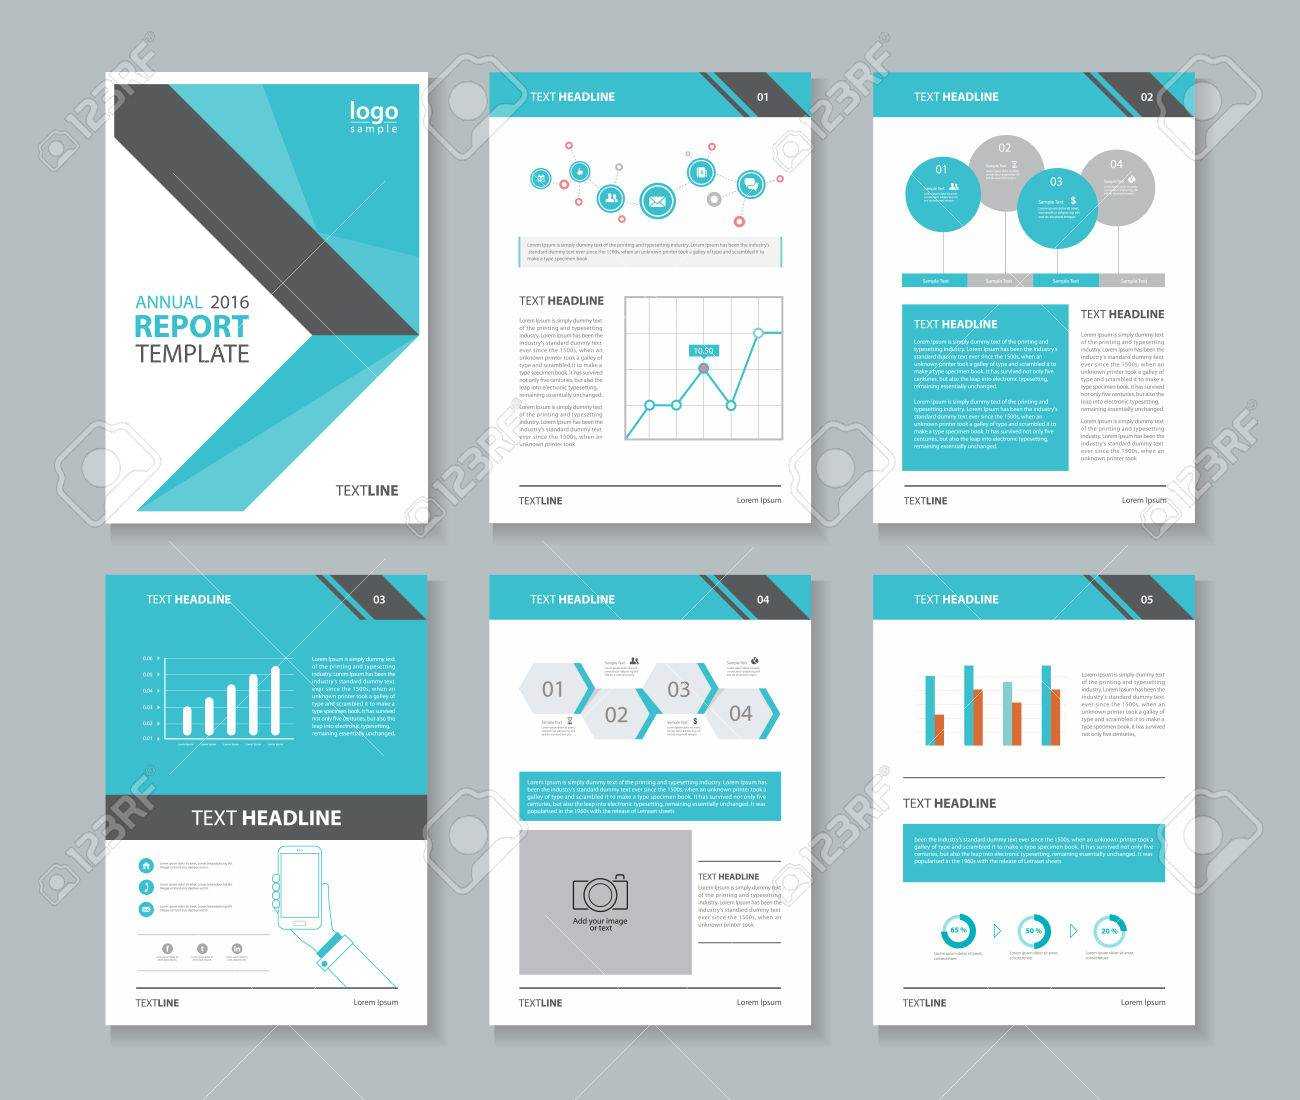 Annual Report Layout Template Regarding Free Indesign Report Templates